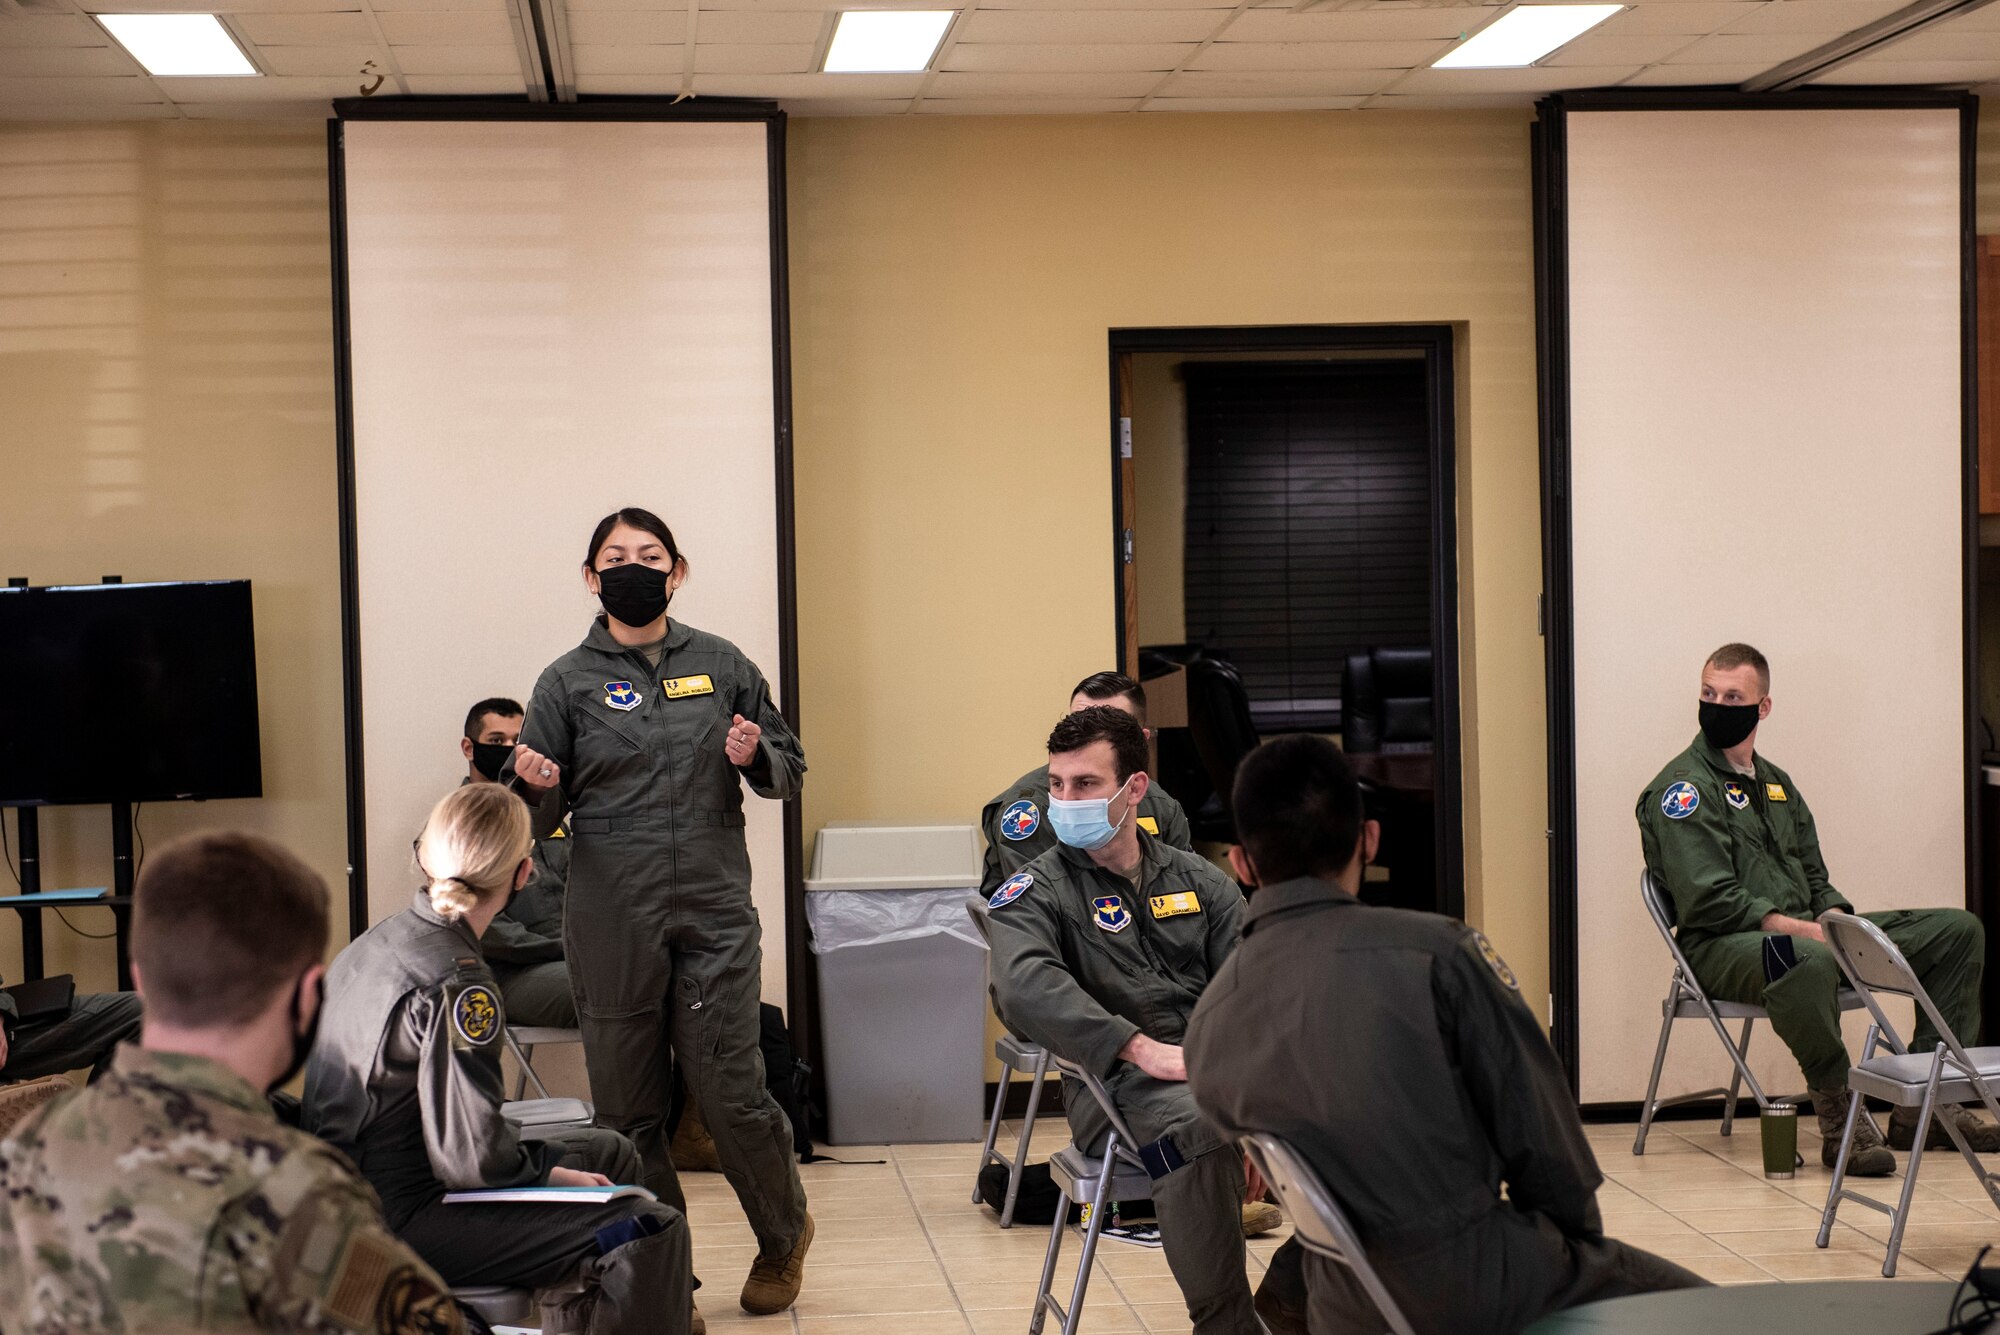 Student pilots introduce themselves to their classmates to bring them together before starting training together. Feb. 01, 2021 at Laughlin Air Force Base, Texas. It's important for the students to bound together because one can make it through pilot training alone. (U.S. Air Force photo by Airman 1st Class David Phaff)